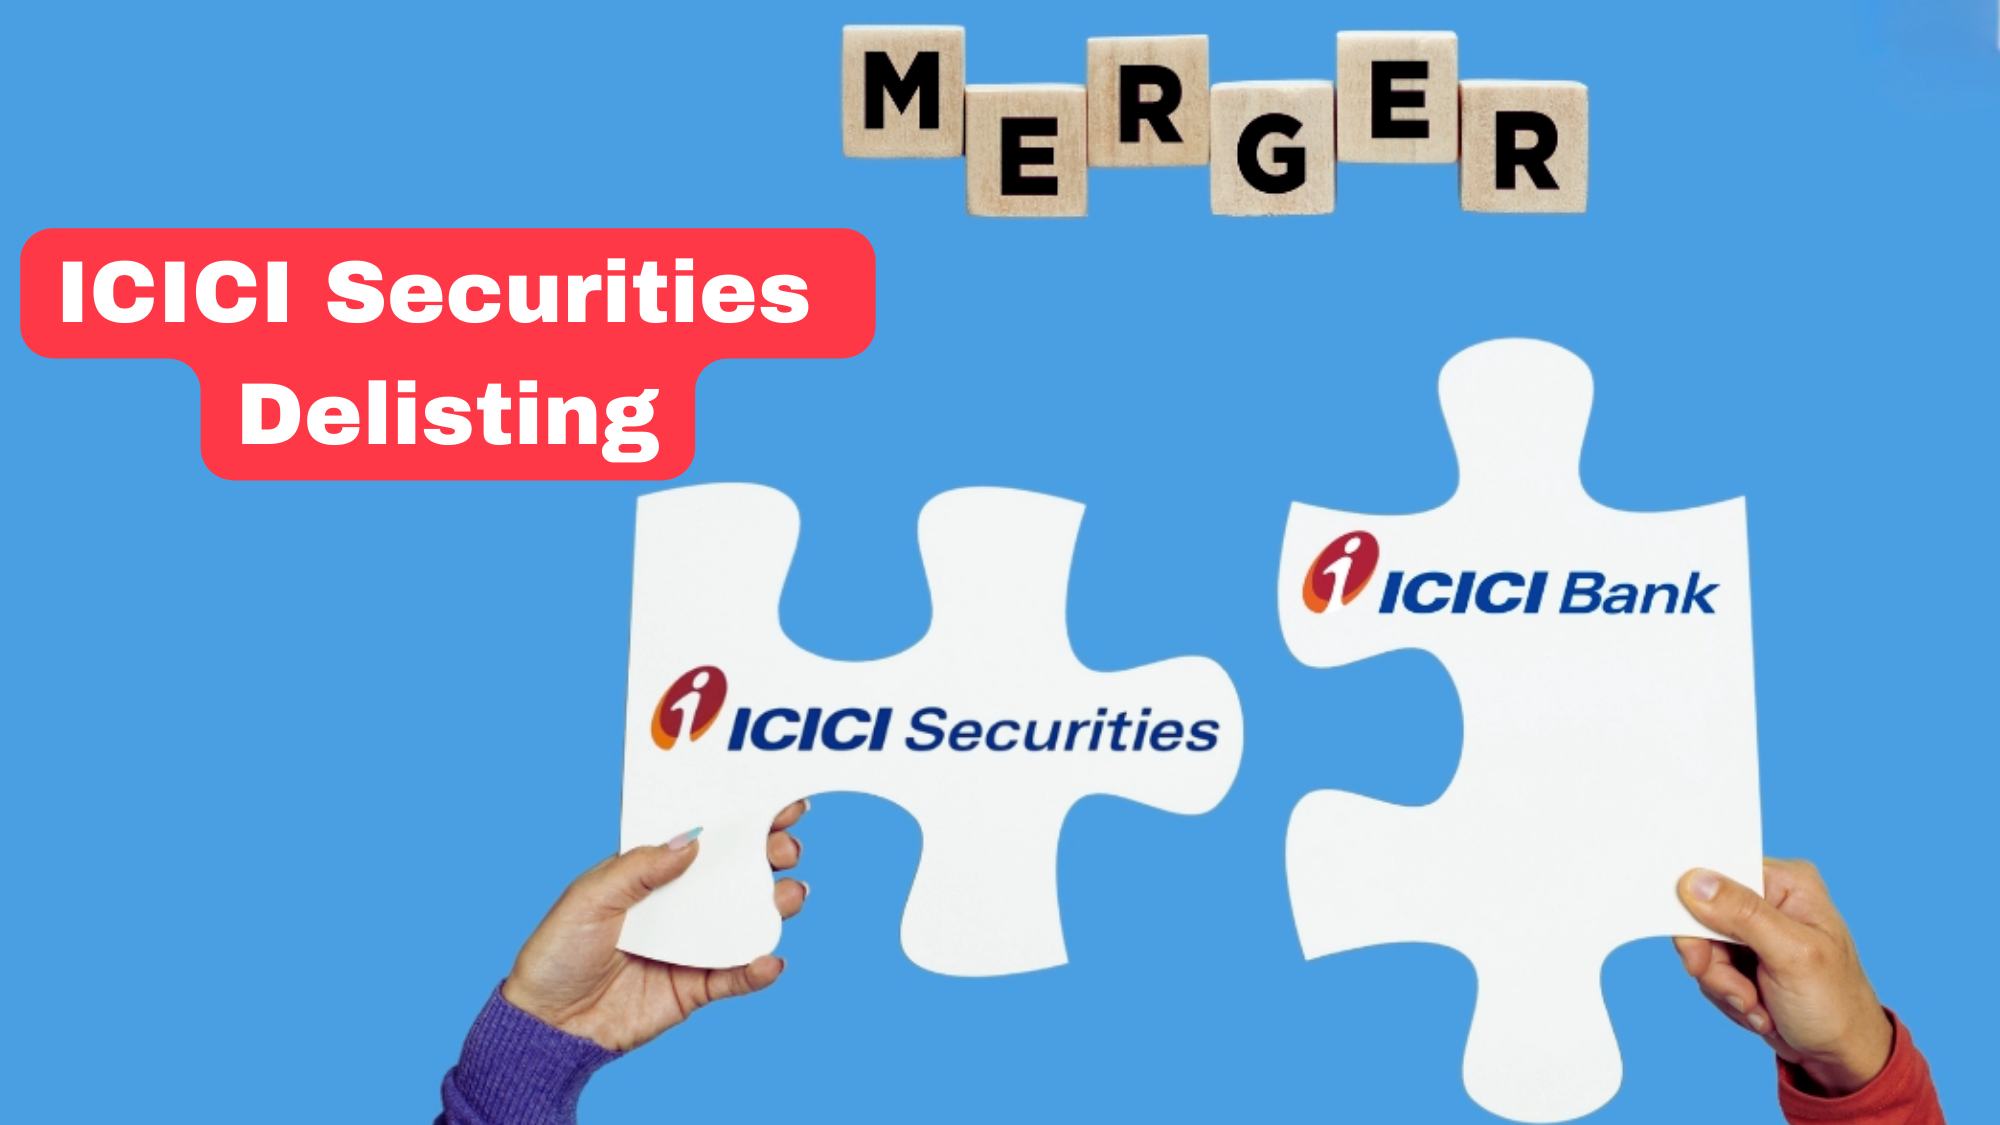 What Makes ICICI Securities Delisting and Merger Important?